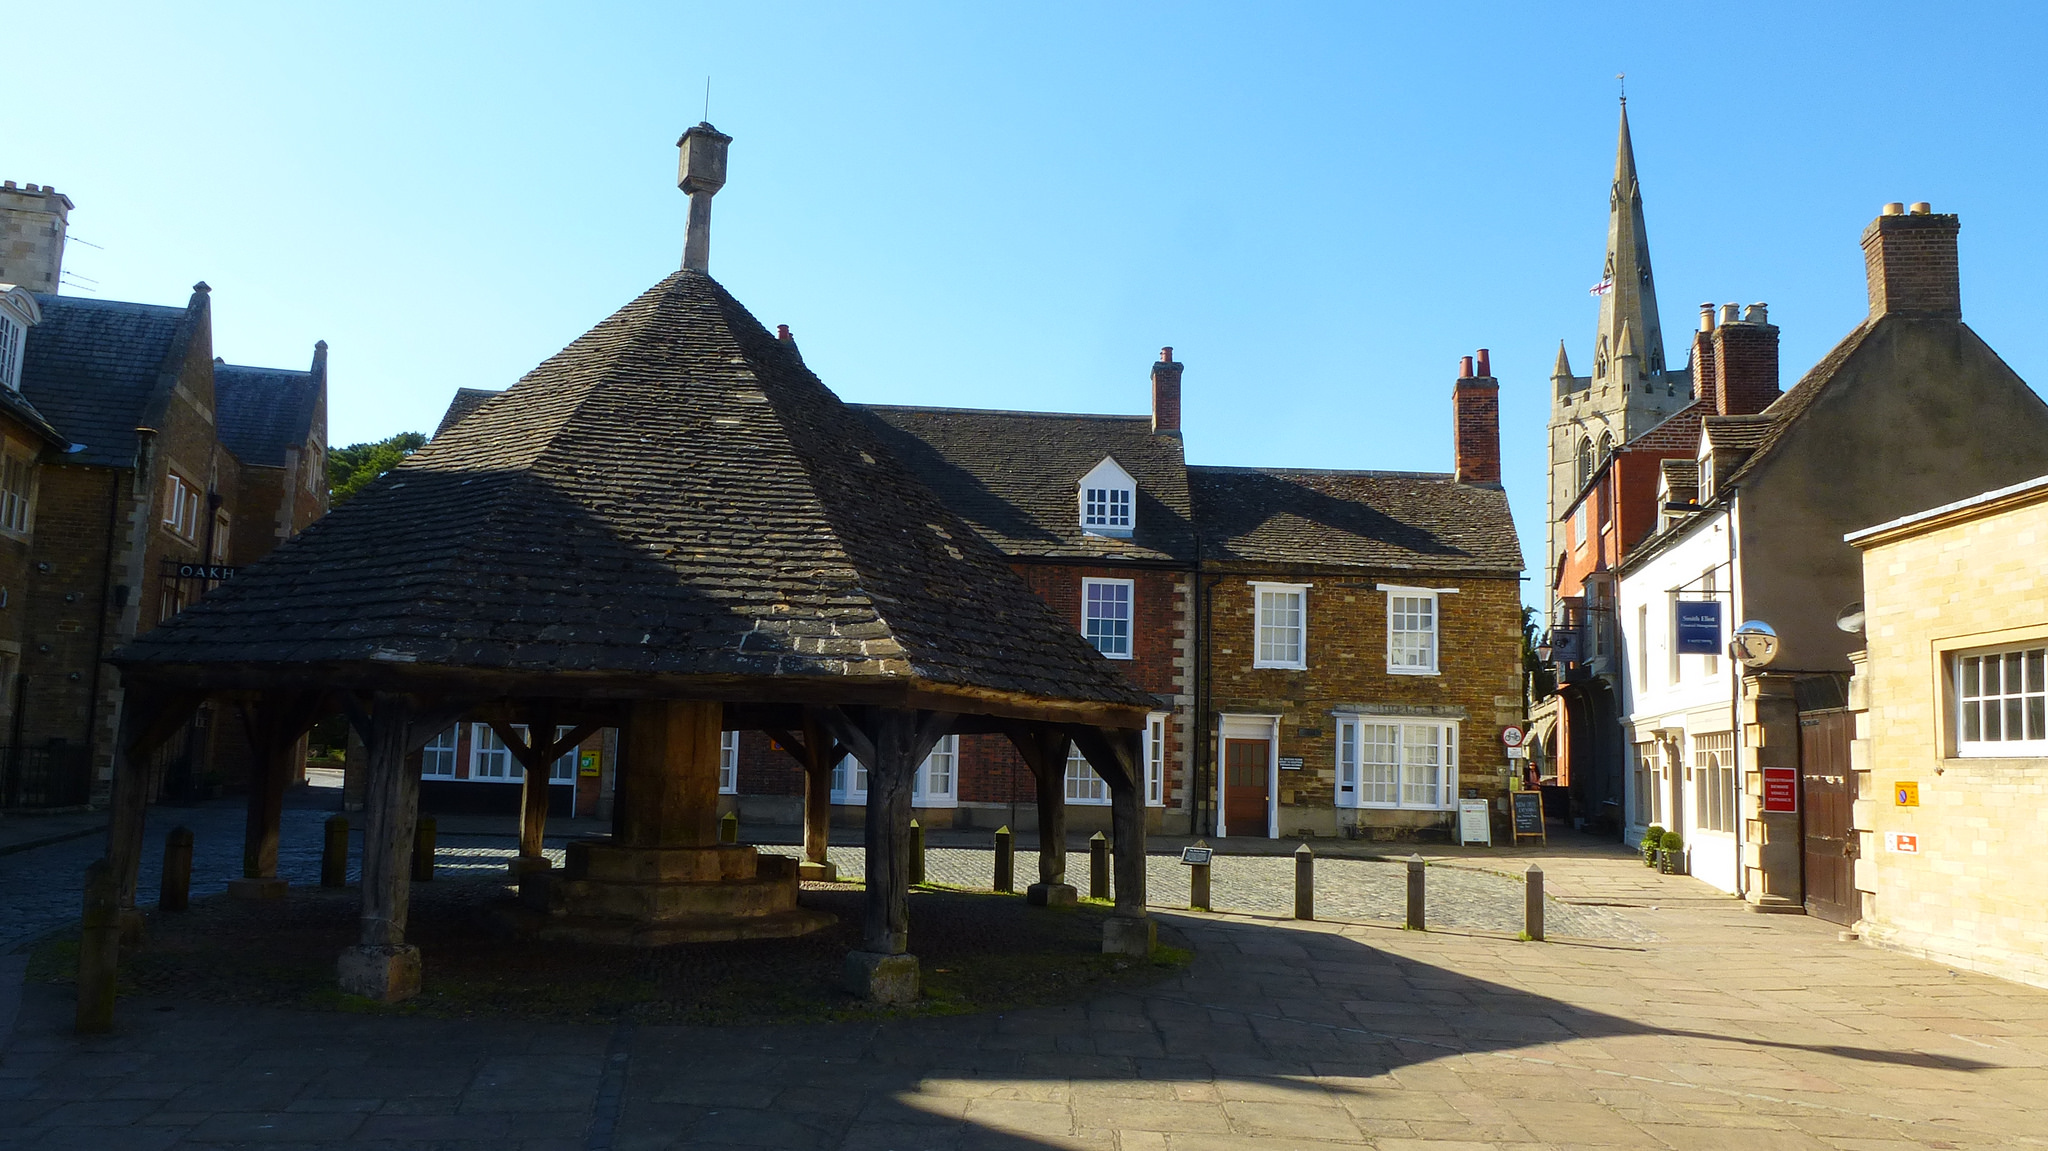 A view of a charming house-lined square in Oakham